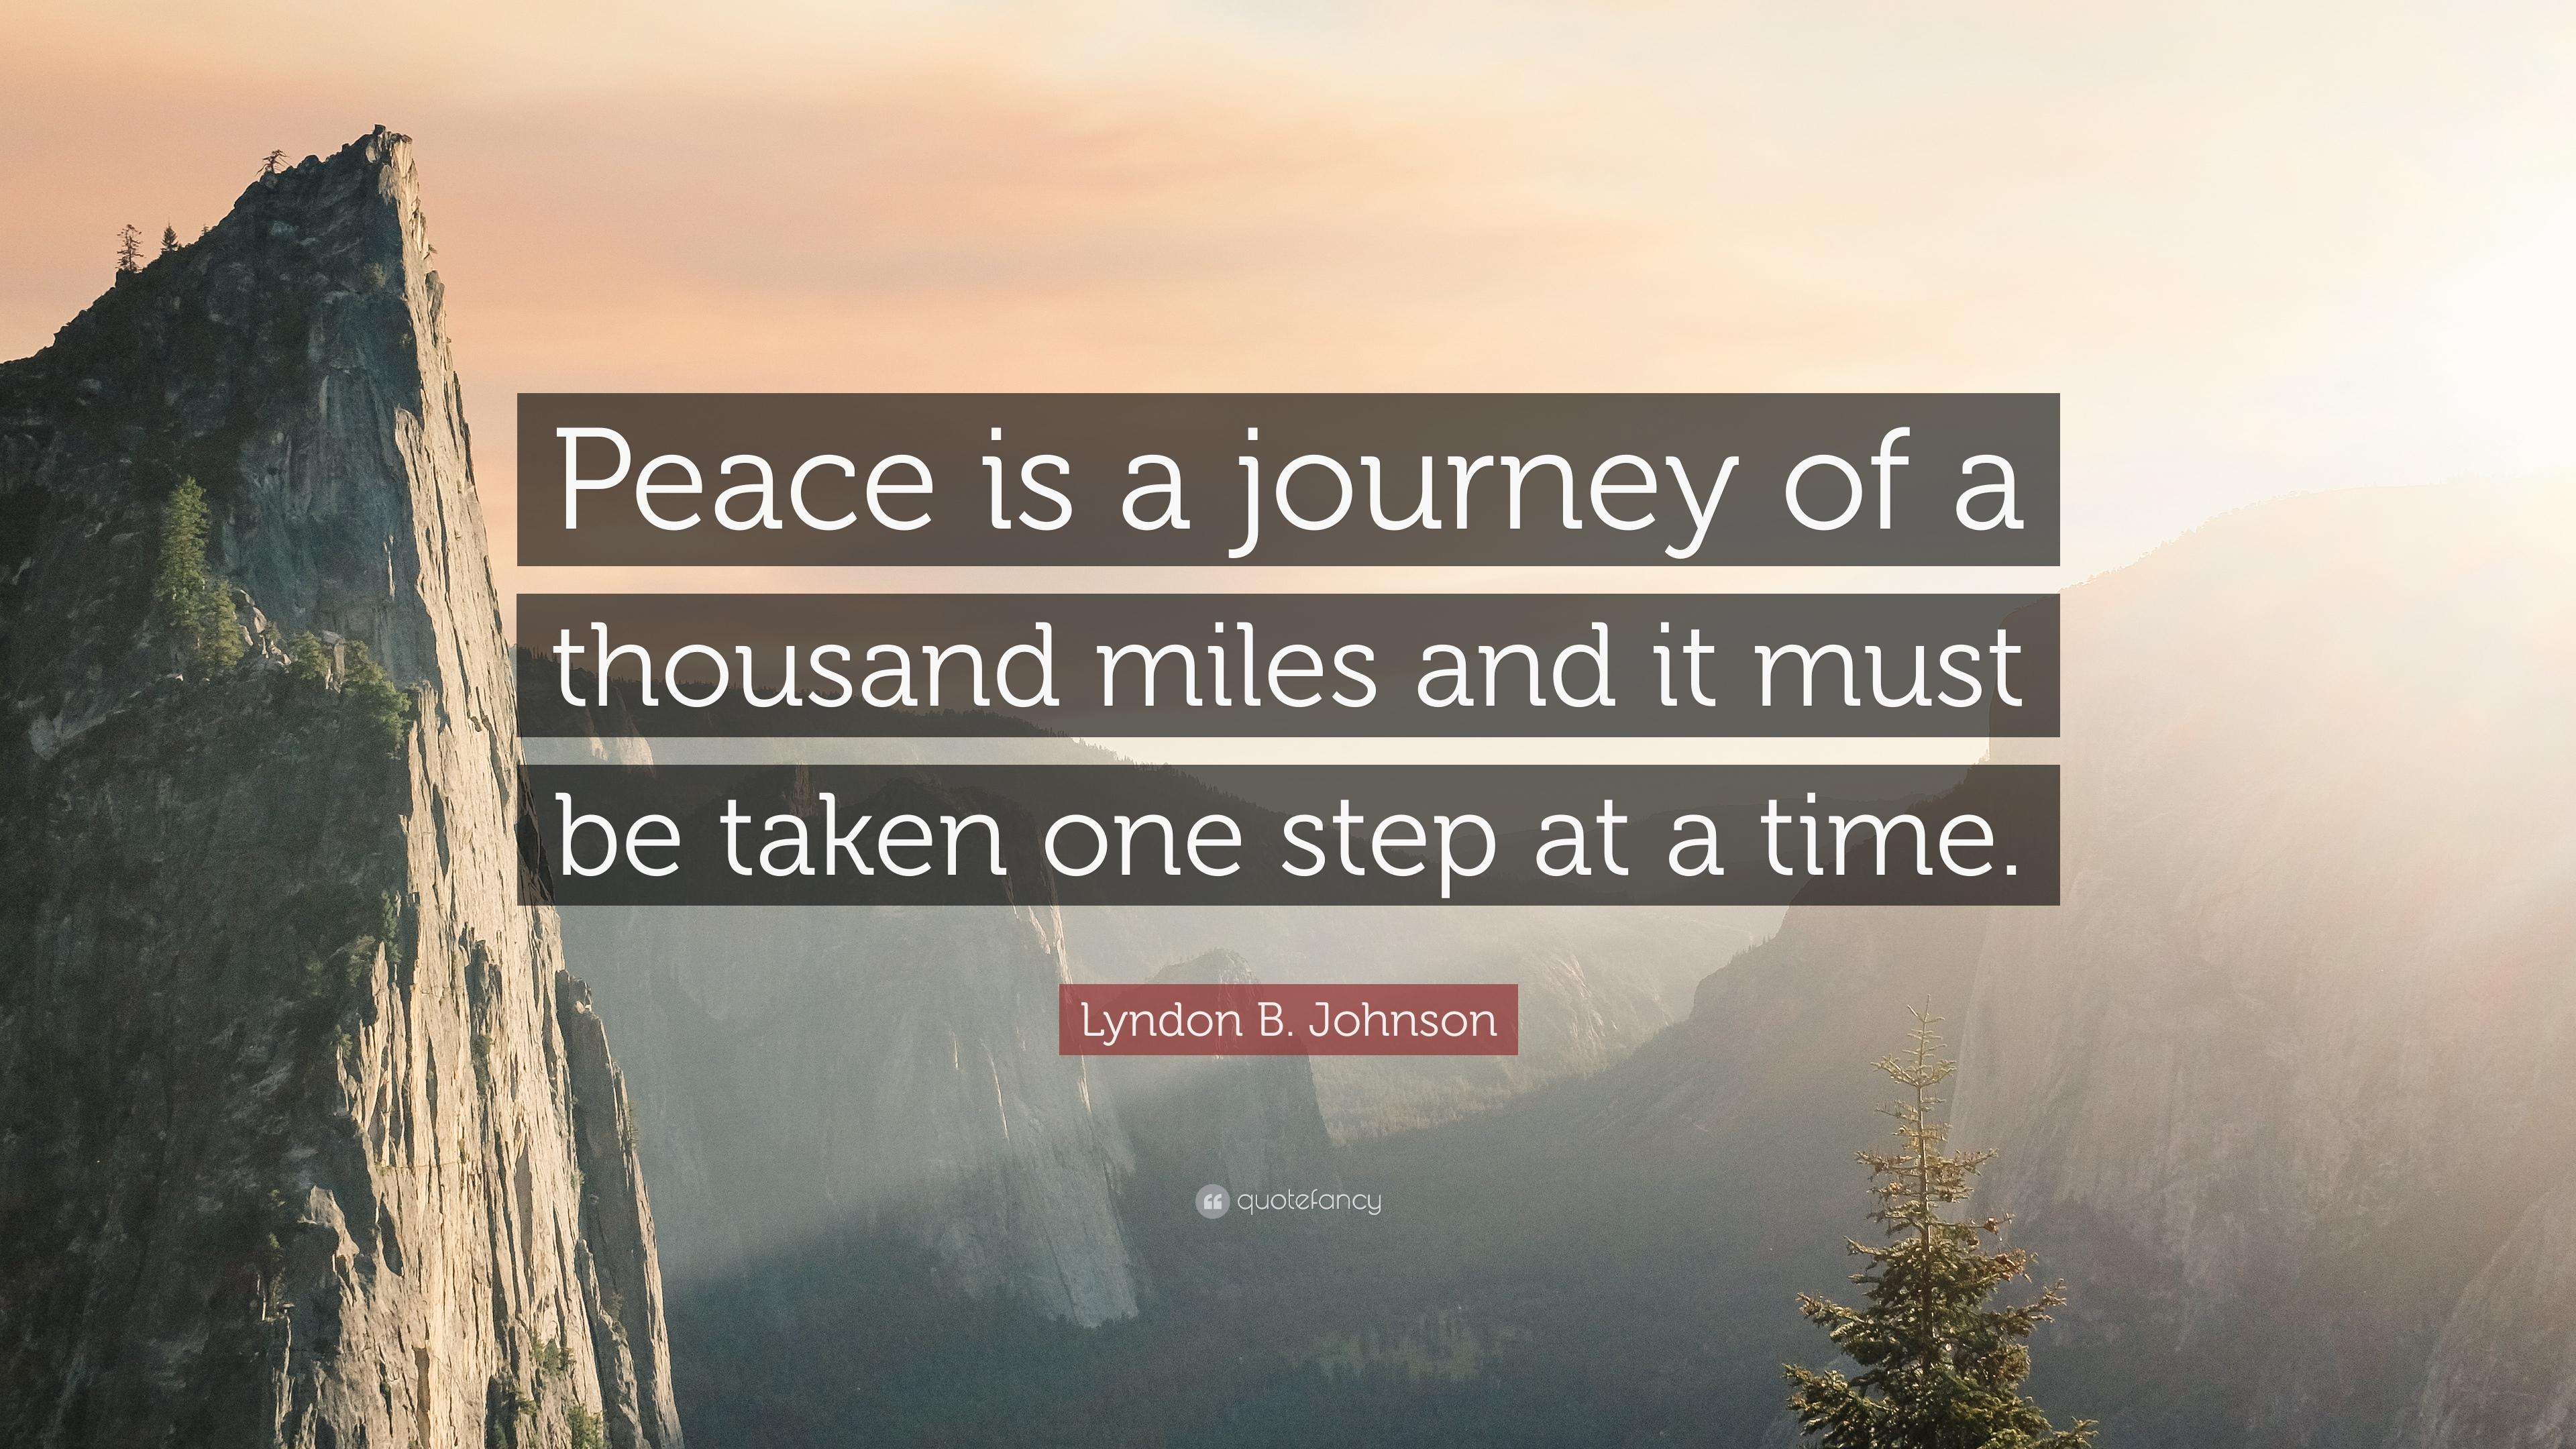 Lyndon B. Johnson Quote: “Peace is a journey of a thousand miles